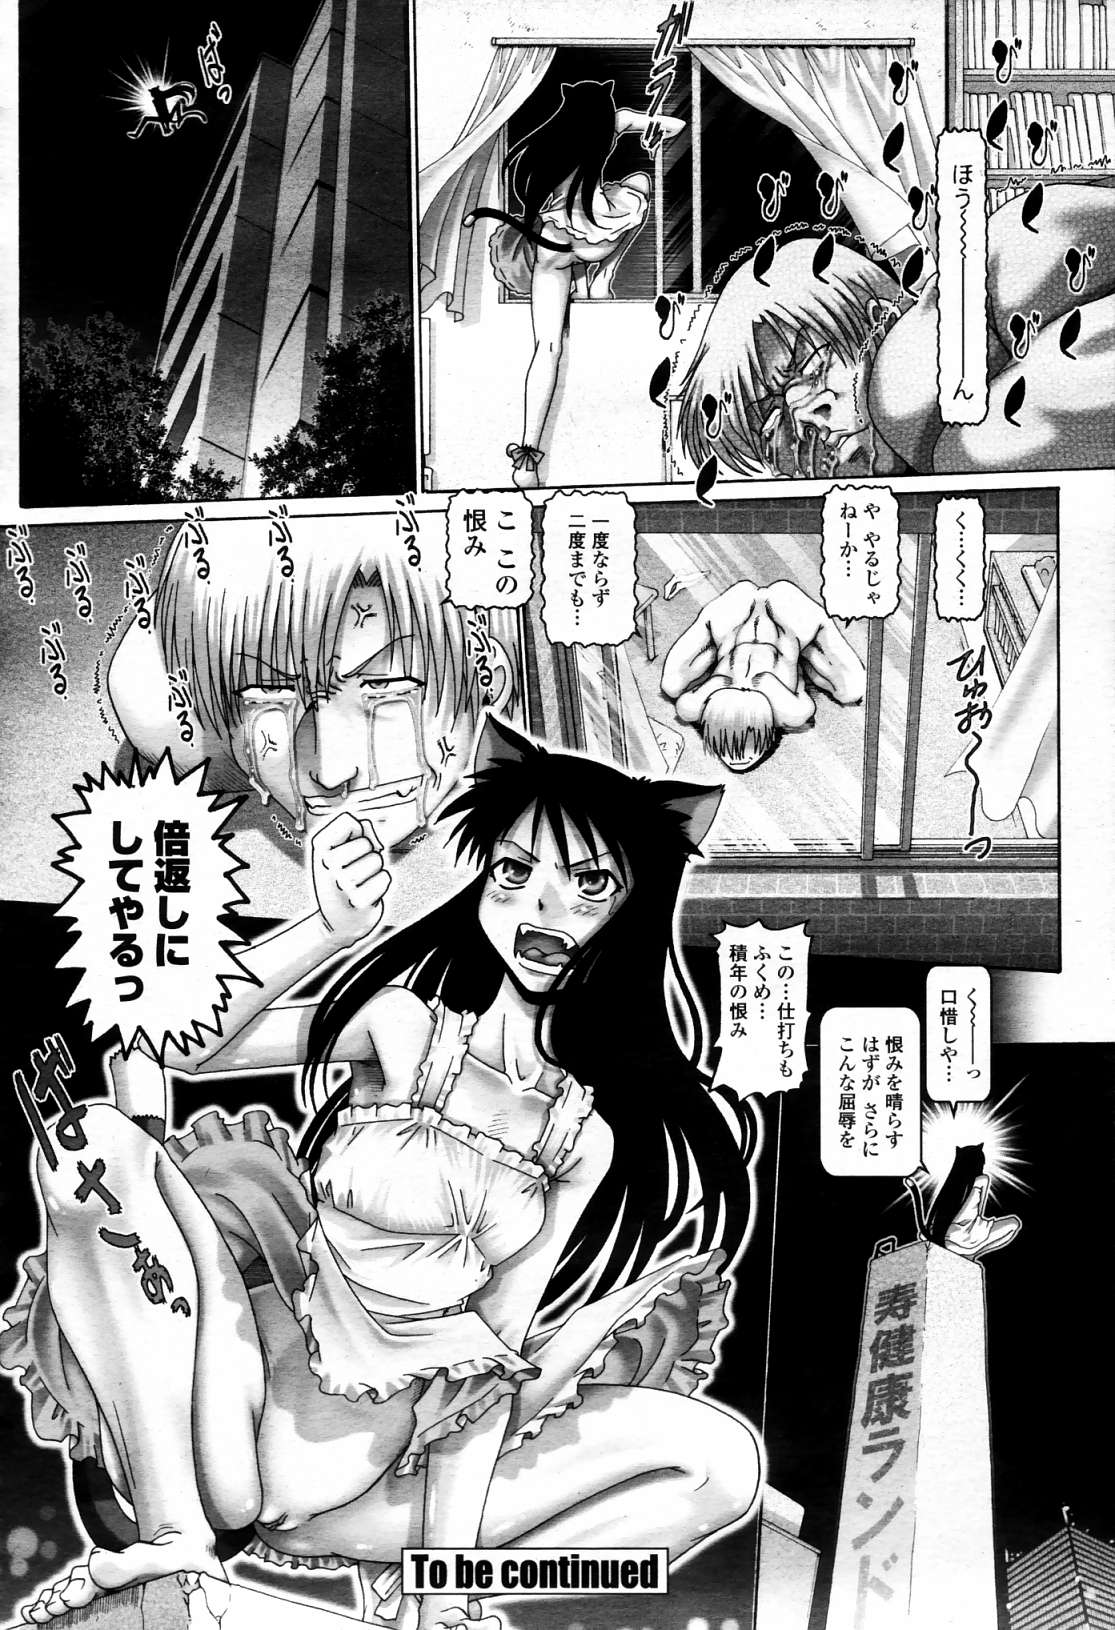 COMIC Momohime 2006-04 Vol. 66 page 41 full